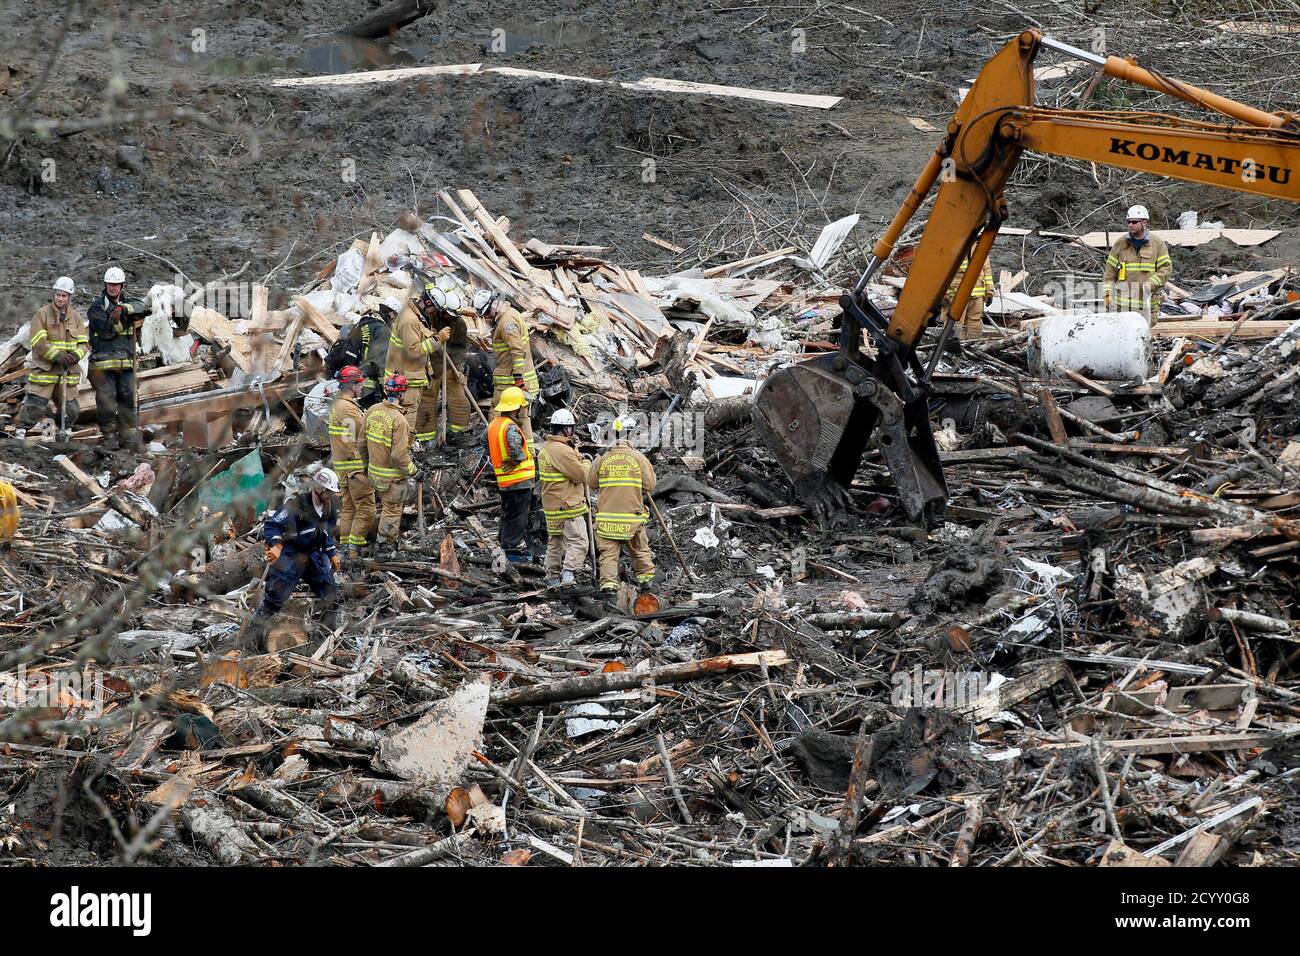 Rescue workers look for victims in the mudslide near Oso, Washington March 26, 2014. The death toll from a massive landslide in Washington state stood at 24 on Wednesday, but the mud-stricken community braced for a higher body count as search teams combed through debris looking for scores of people still missing four days after the disaster. REUTERS/Rick Wilking(UNITED STATES - Tags: DISASTER ENVIRONMENT) Stock Photo